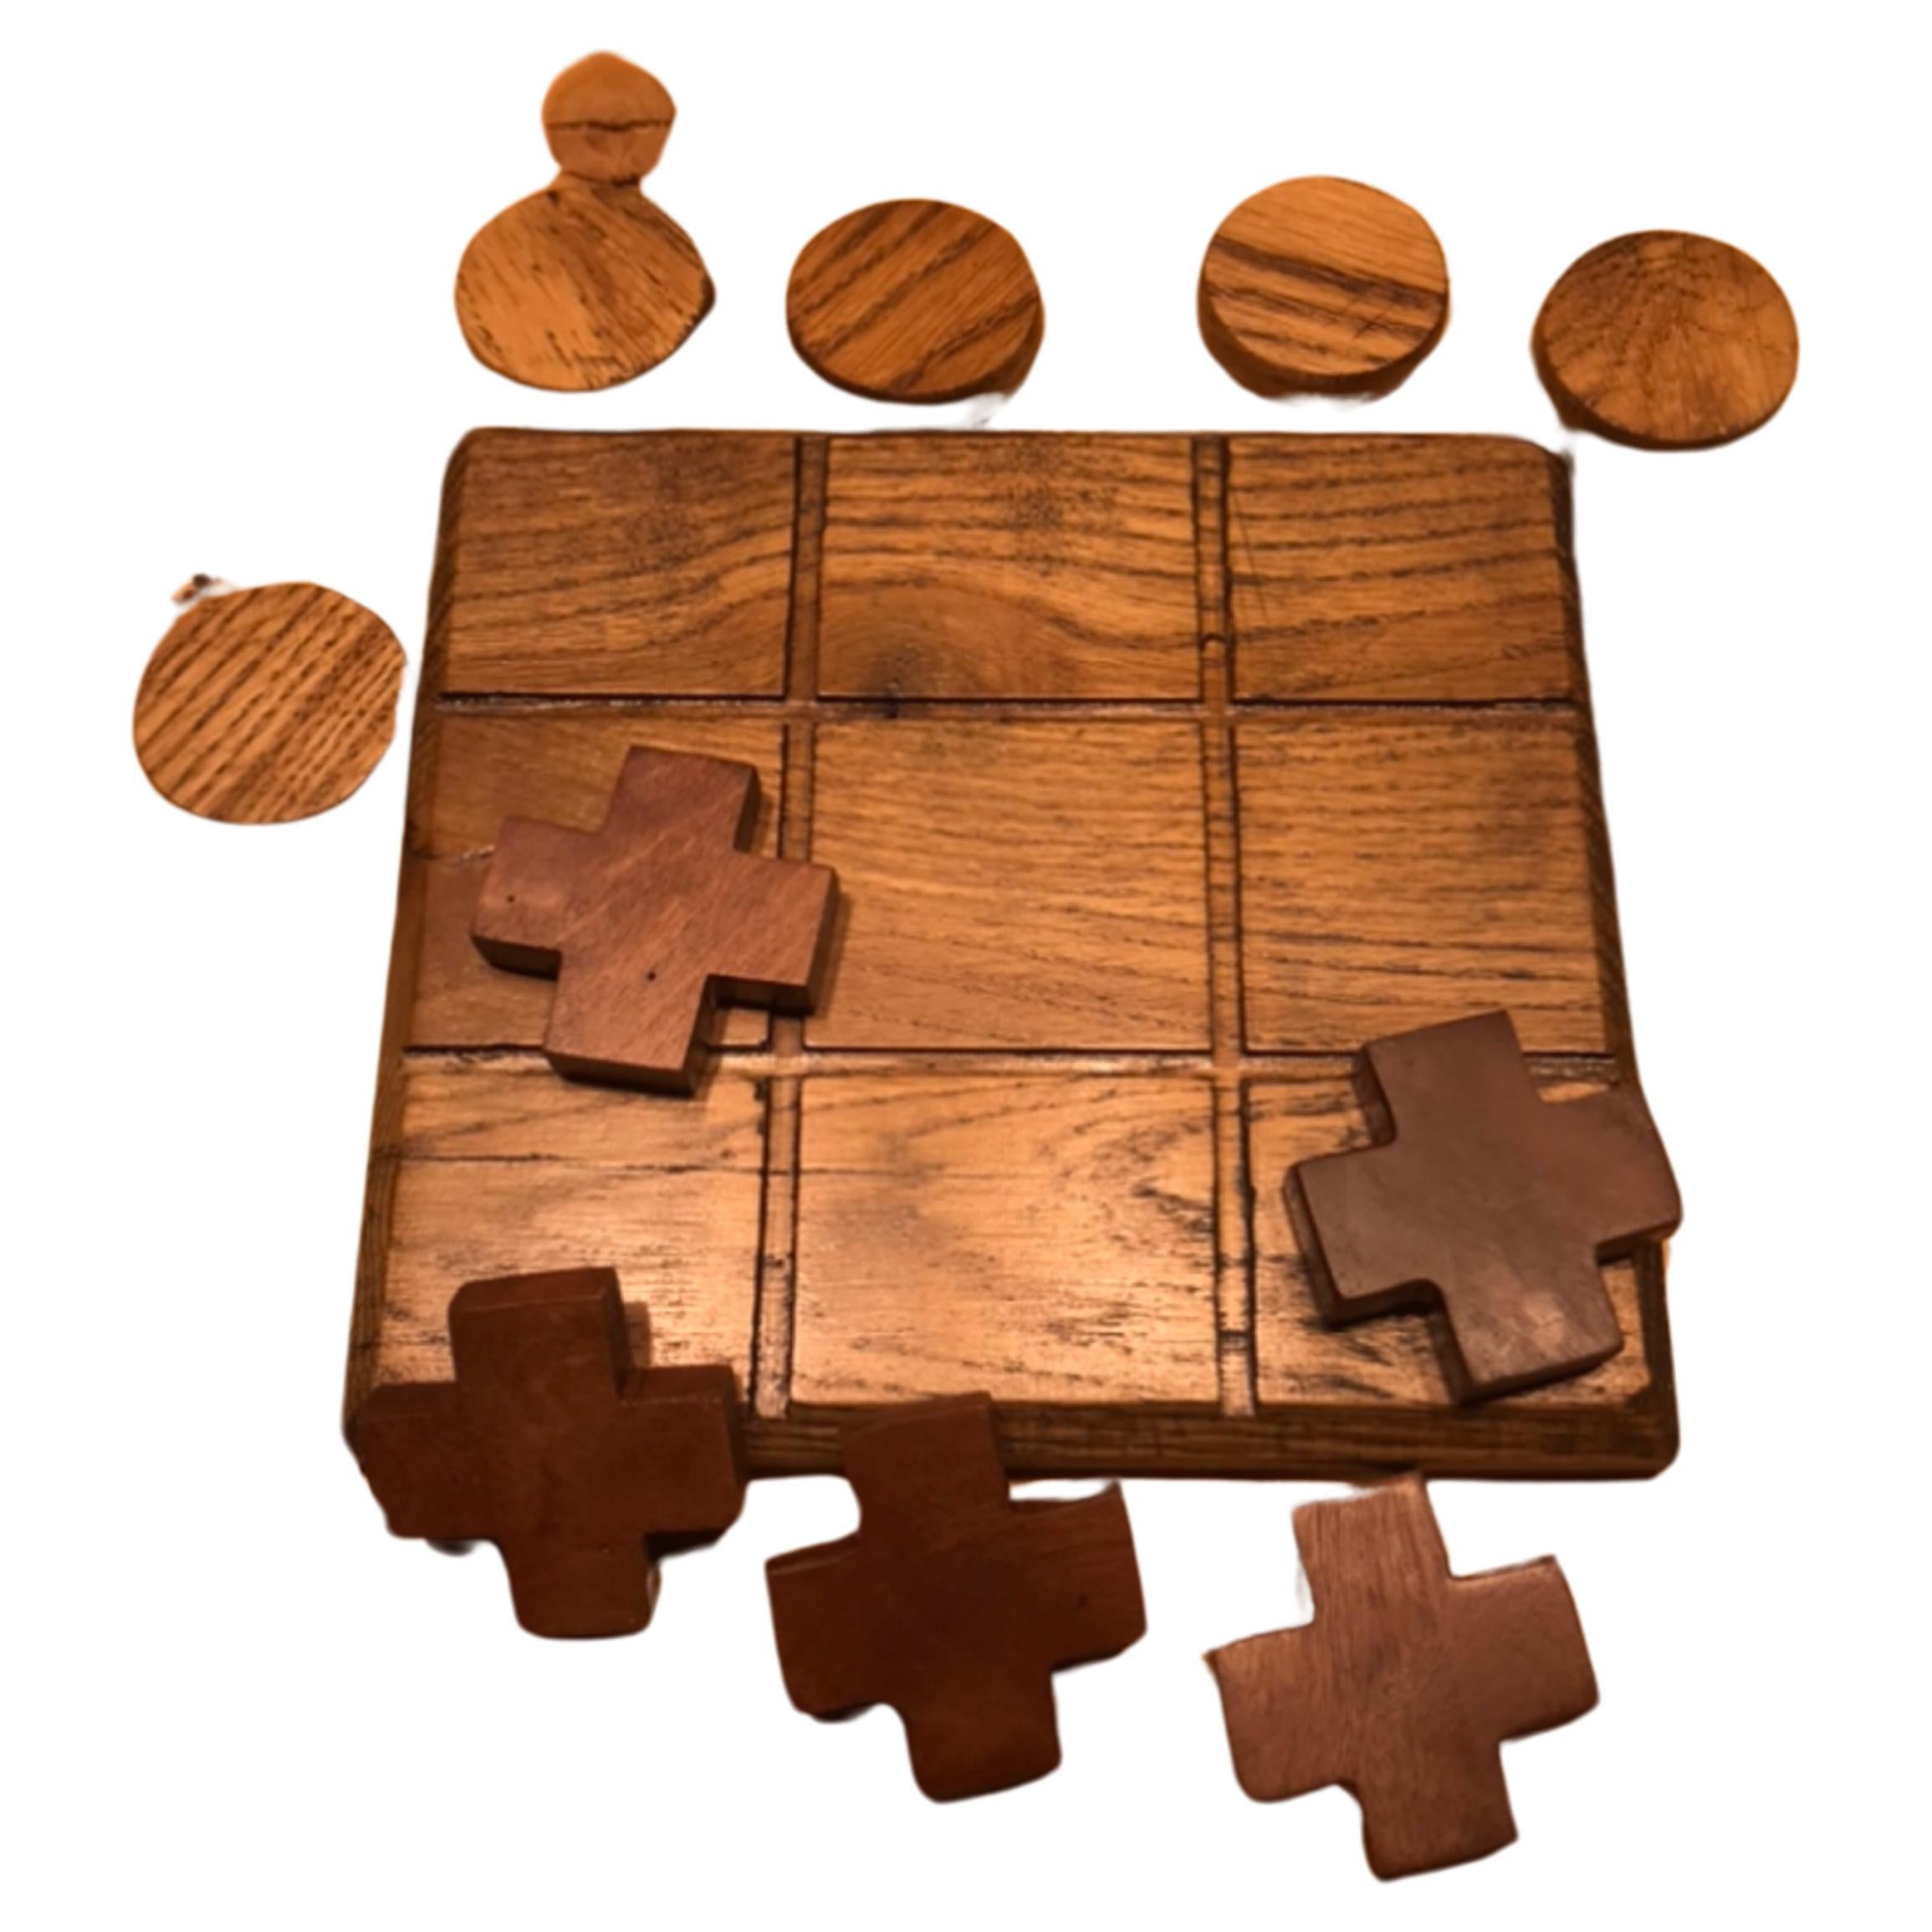 Board game tic-tac-toe For Sale